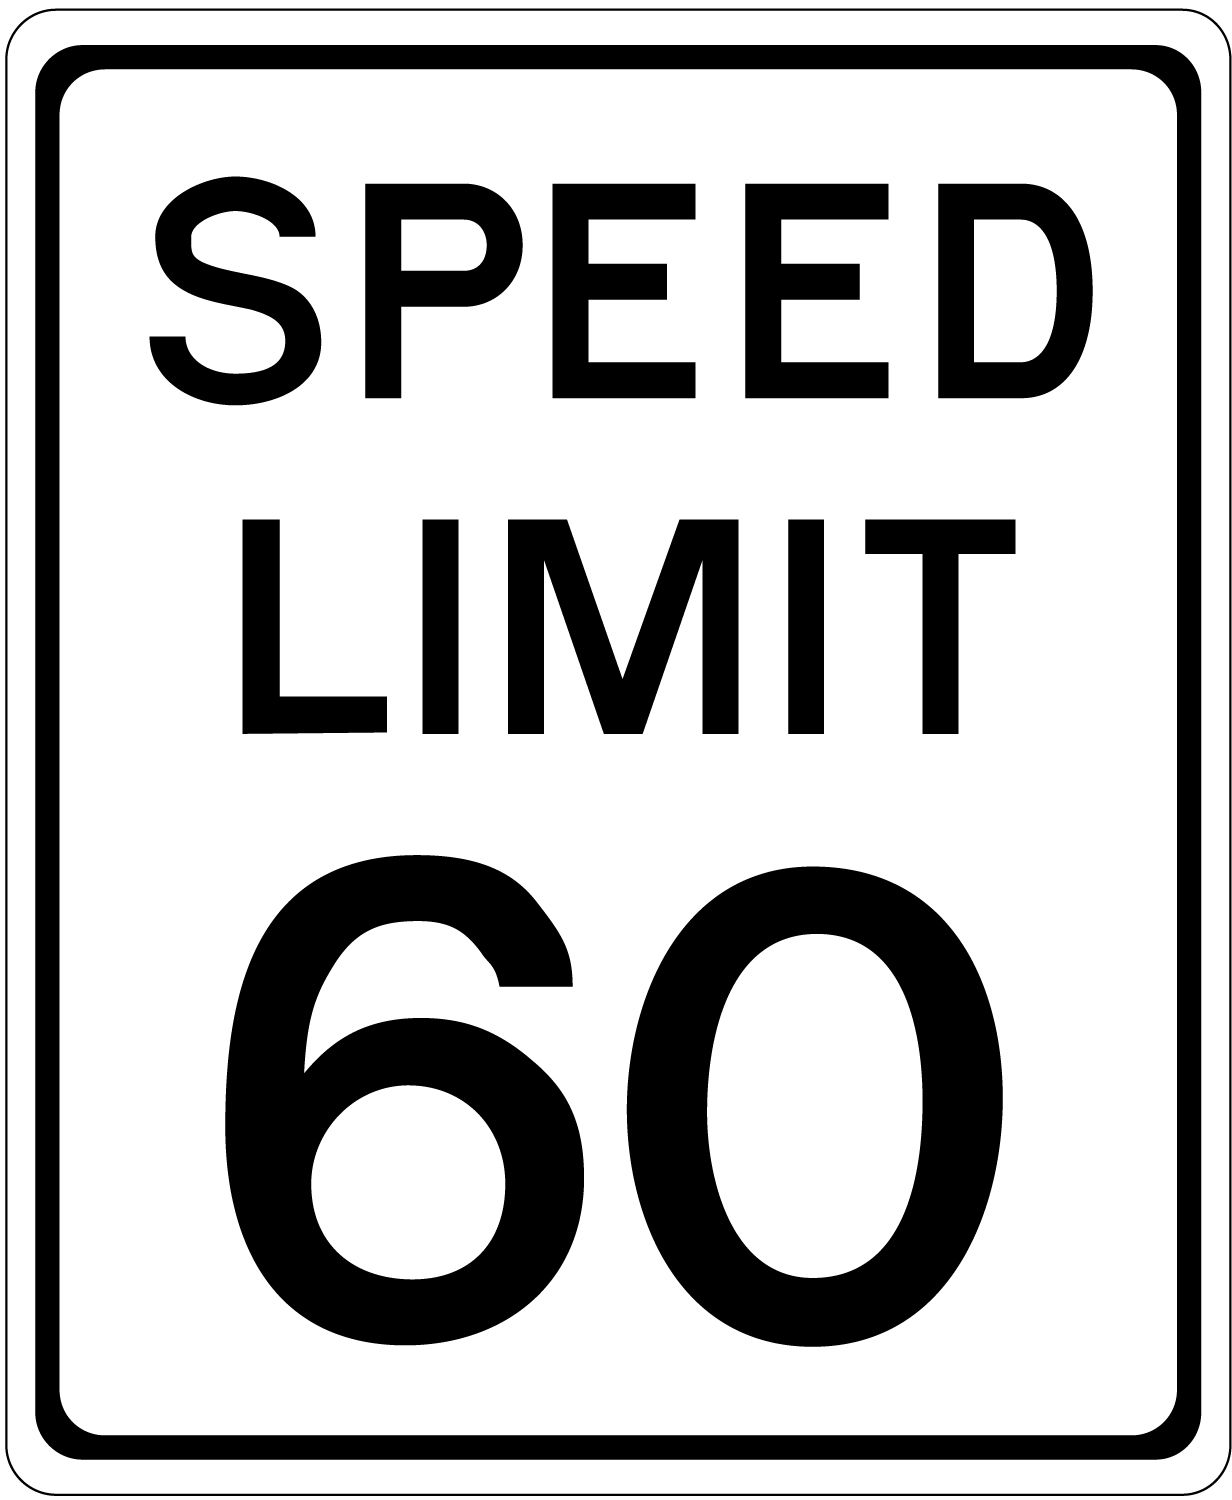 The maximum speed limit in Indiana is 60mph on highways unless otherwise posted.